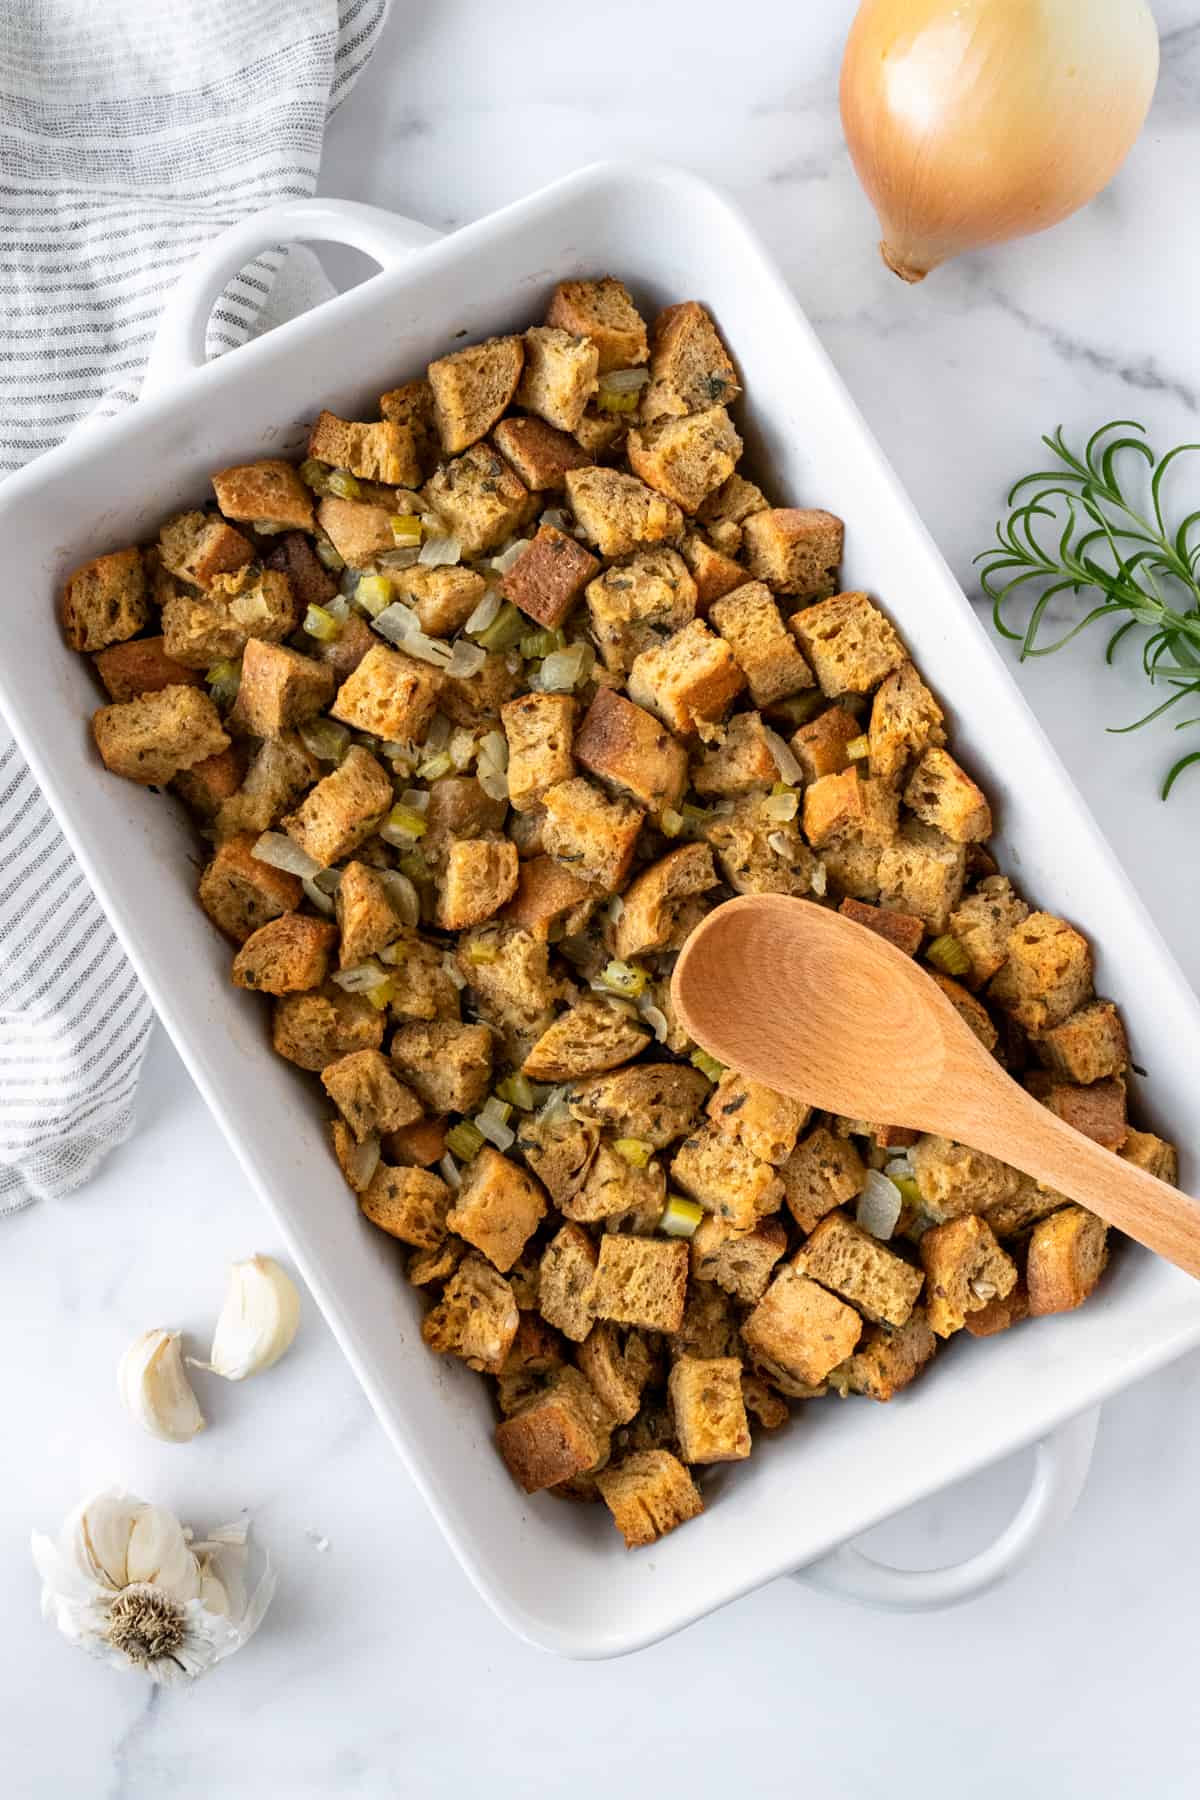 Homemade Stuffing with French Bread